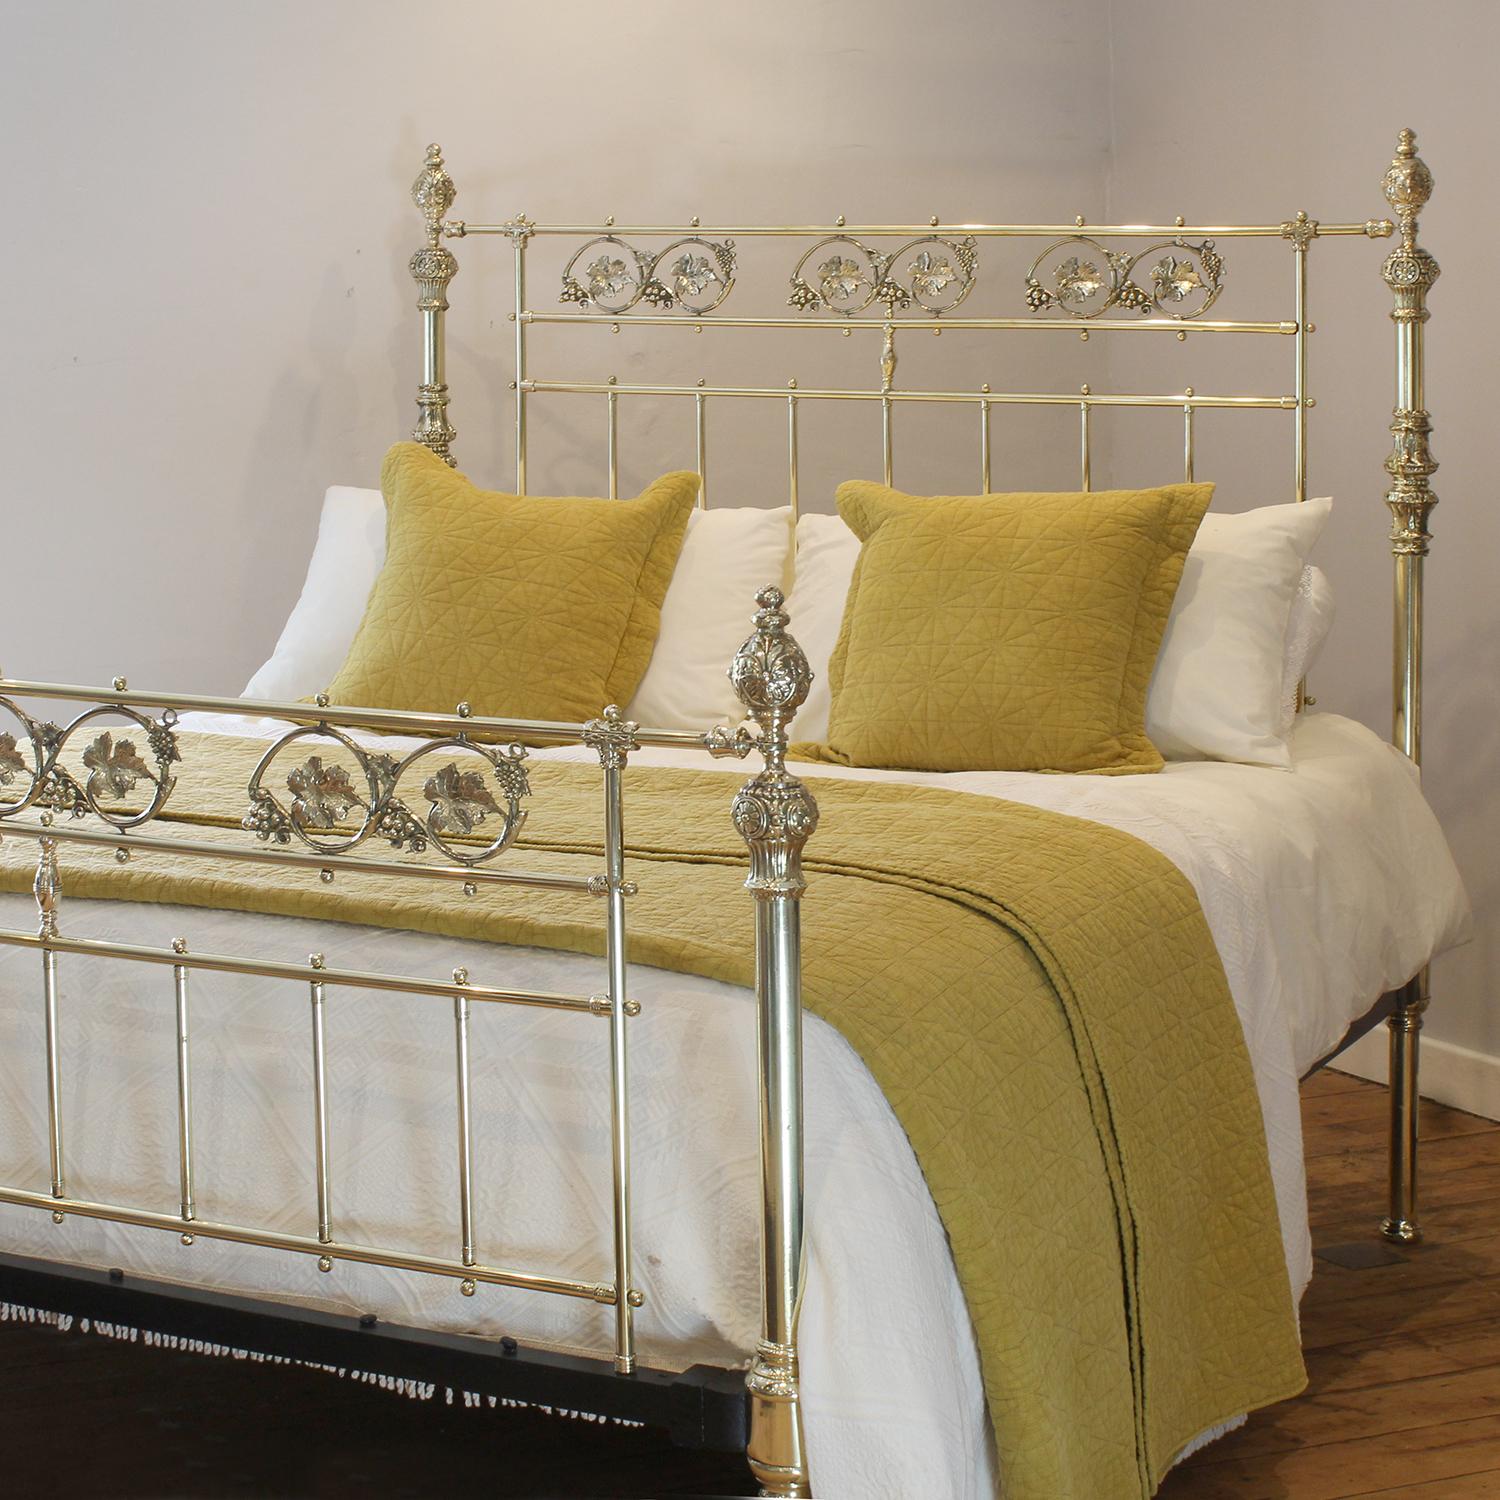 A superb top quality all brass antique bed with decorative brass fittings and gallery in head and foot panels depicting vines with grapes.

This bed will accept a US Queen Size 60 inch wide (or UK King Size 5ft) base and mattress set.

The price